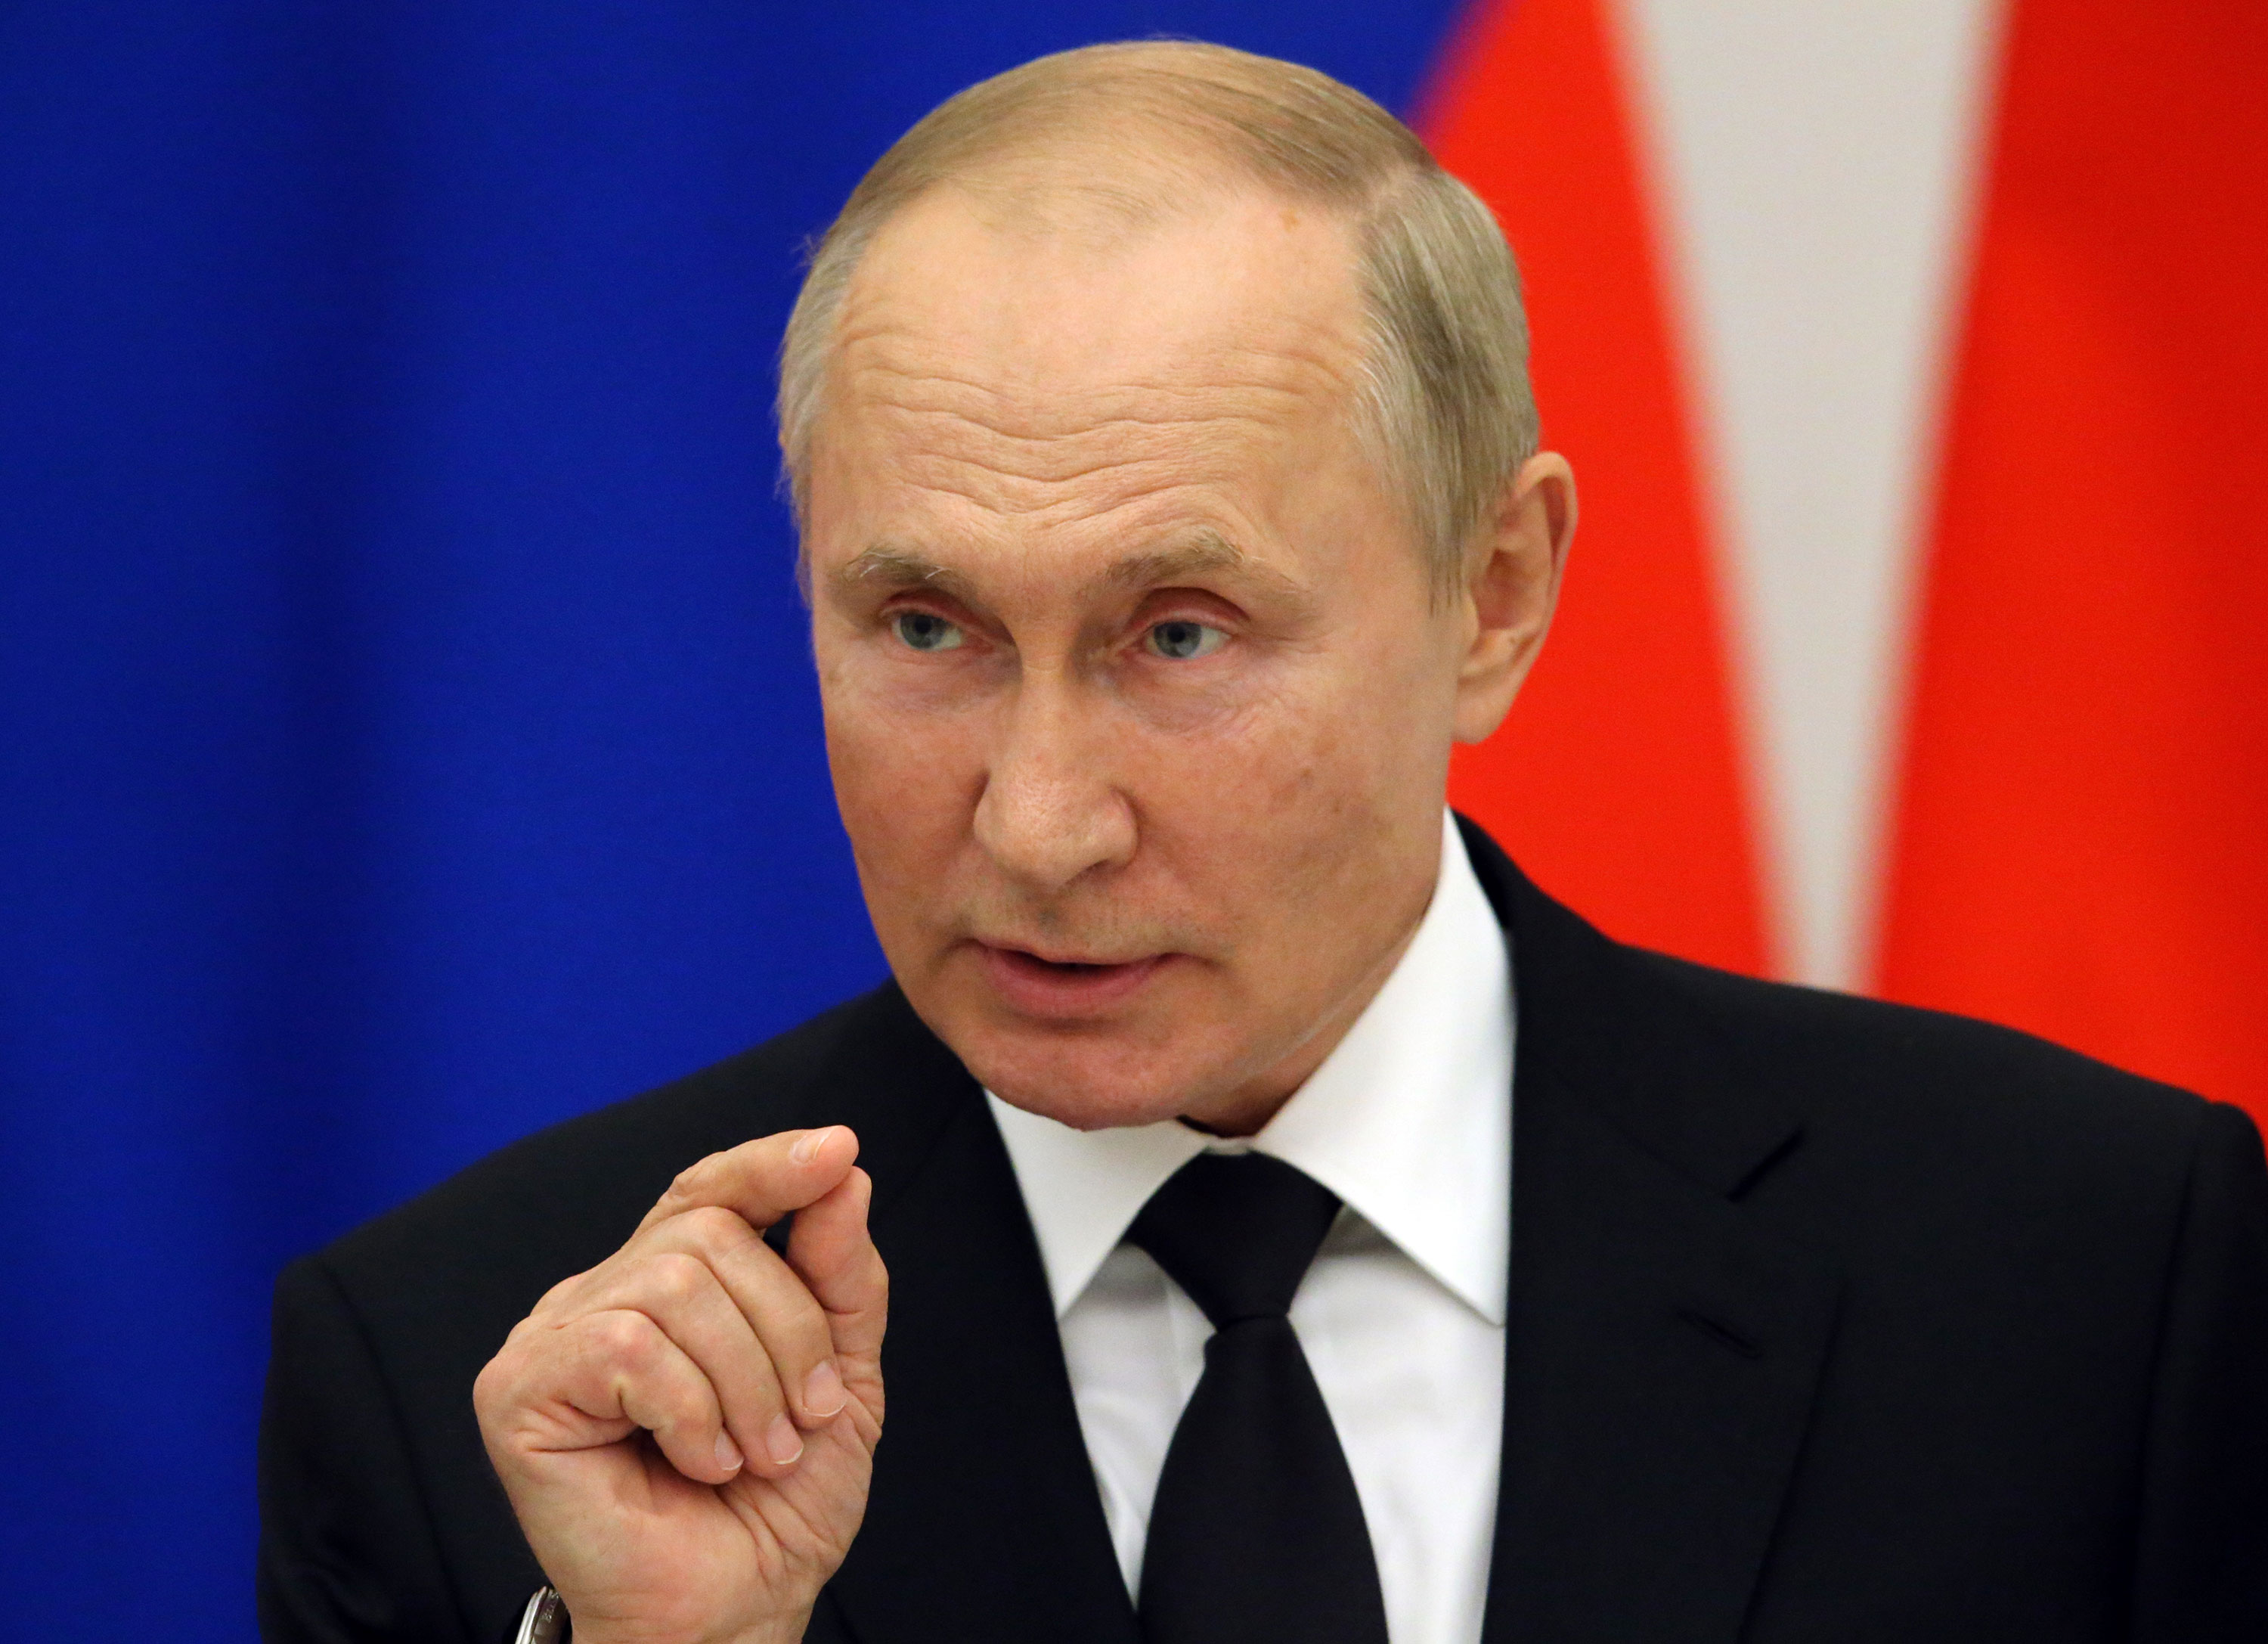 Putin says Russia plans to station tactical nuclear weapons in neighboring Belarus